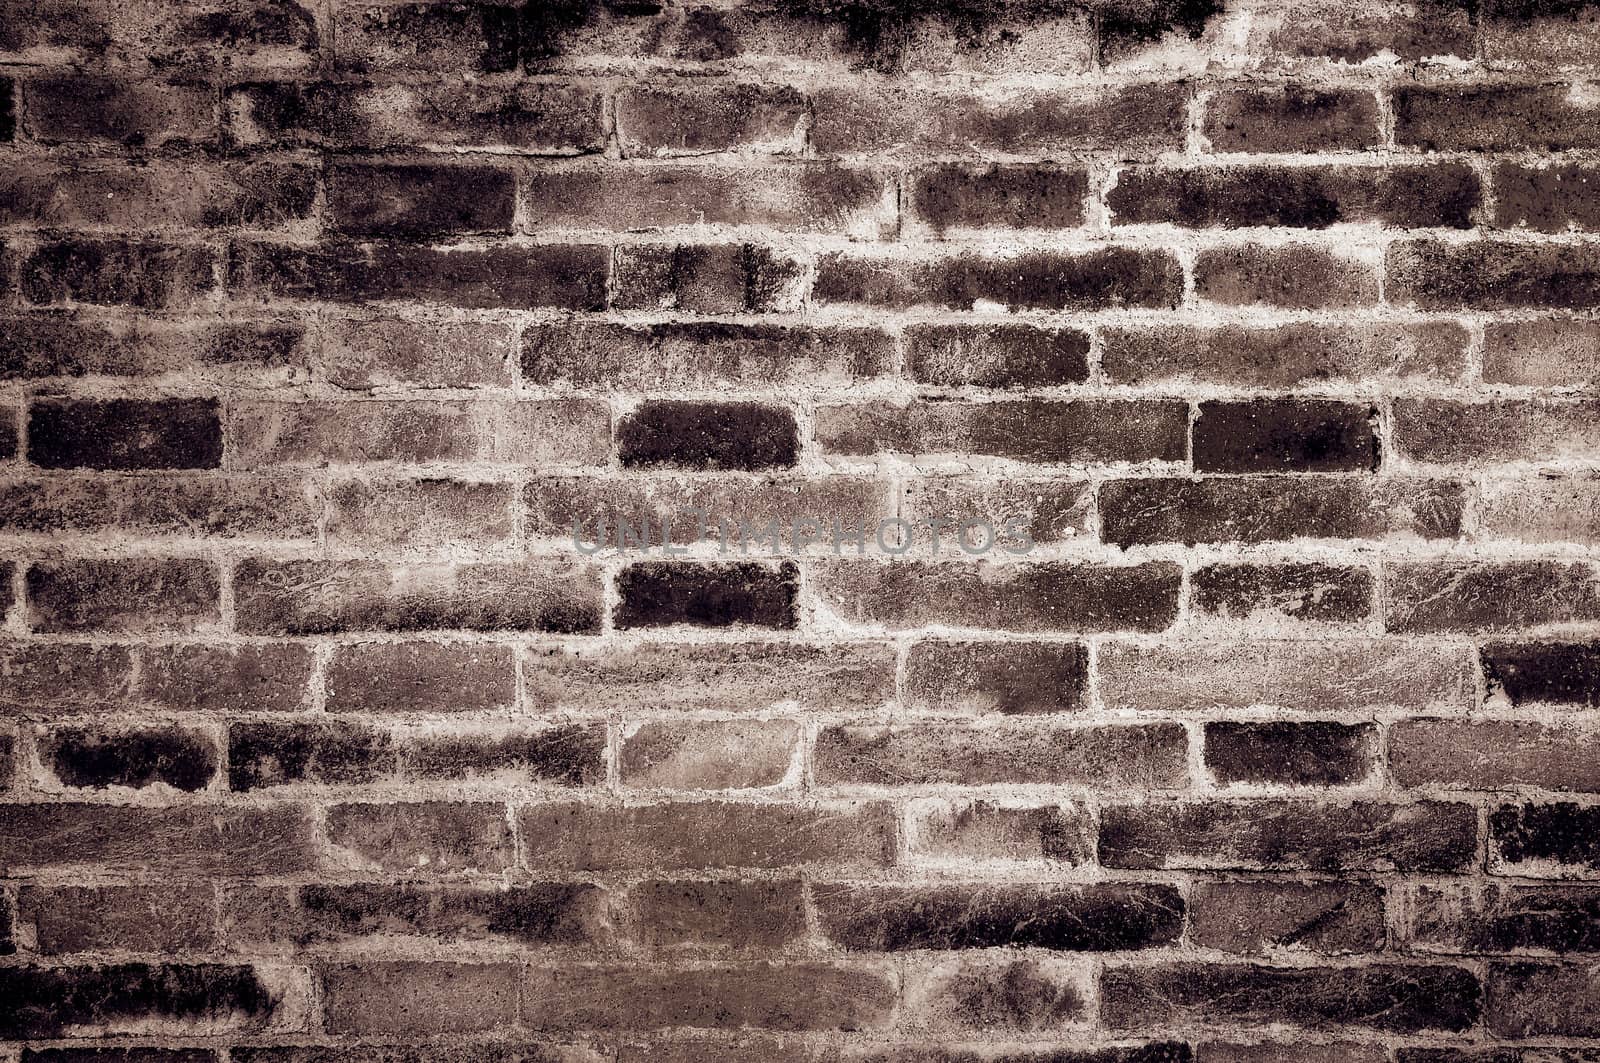 Vintage old textured brick wall close up detail